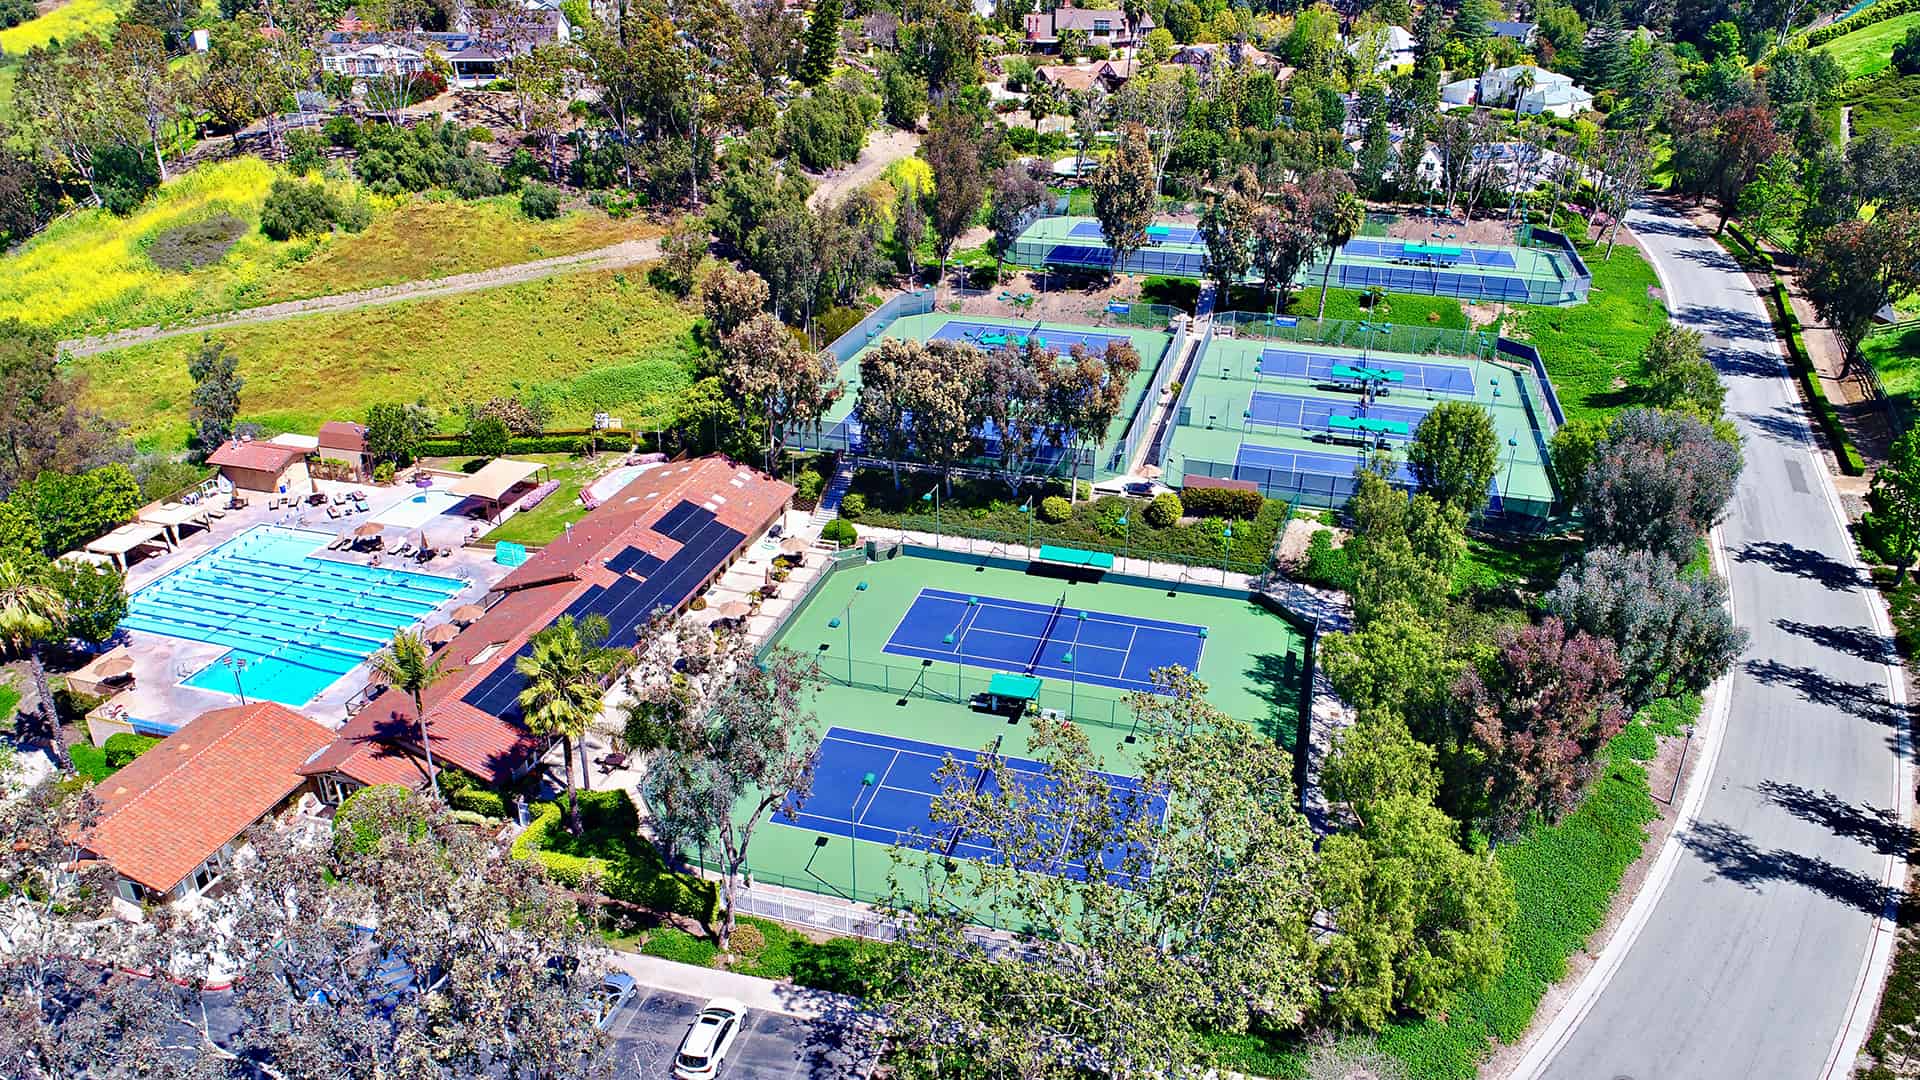 Updated Tennis & Swim Club Schedule and Temporary Use Rules – Nellie